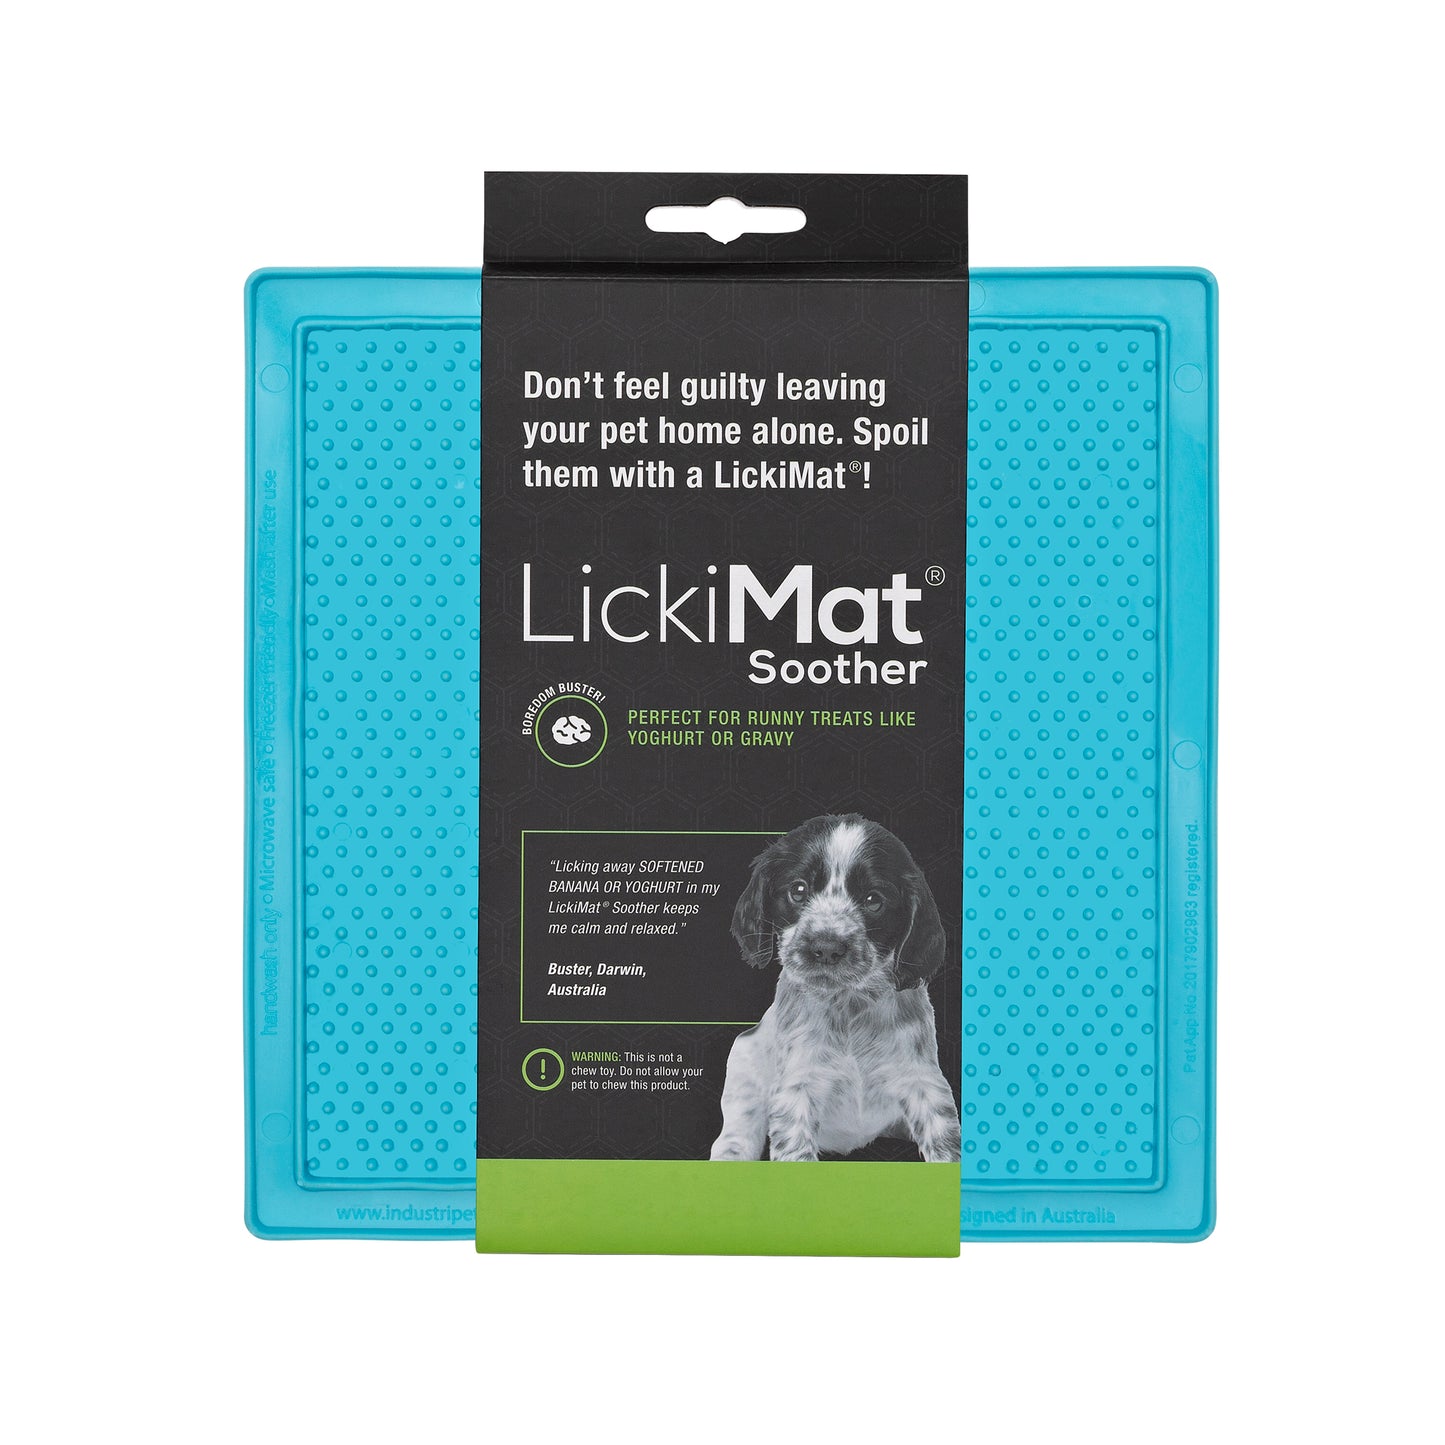 LickiMat® Soother